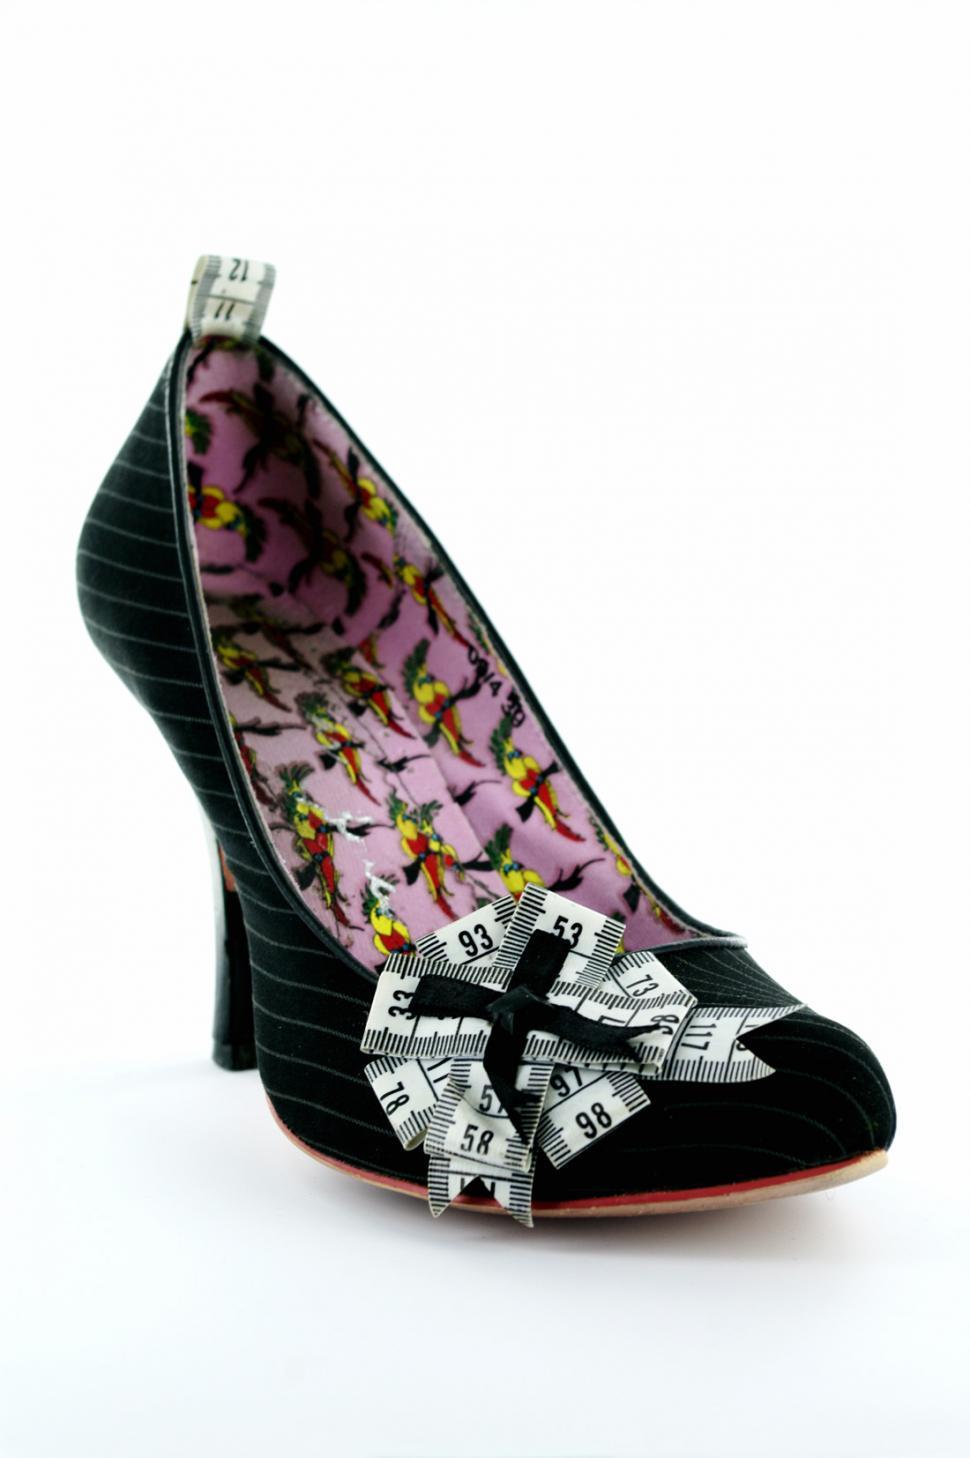 Free Image of Womens High Heel Shoe With Bow 